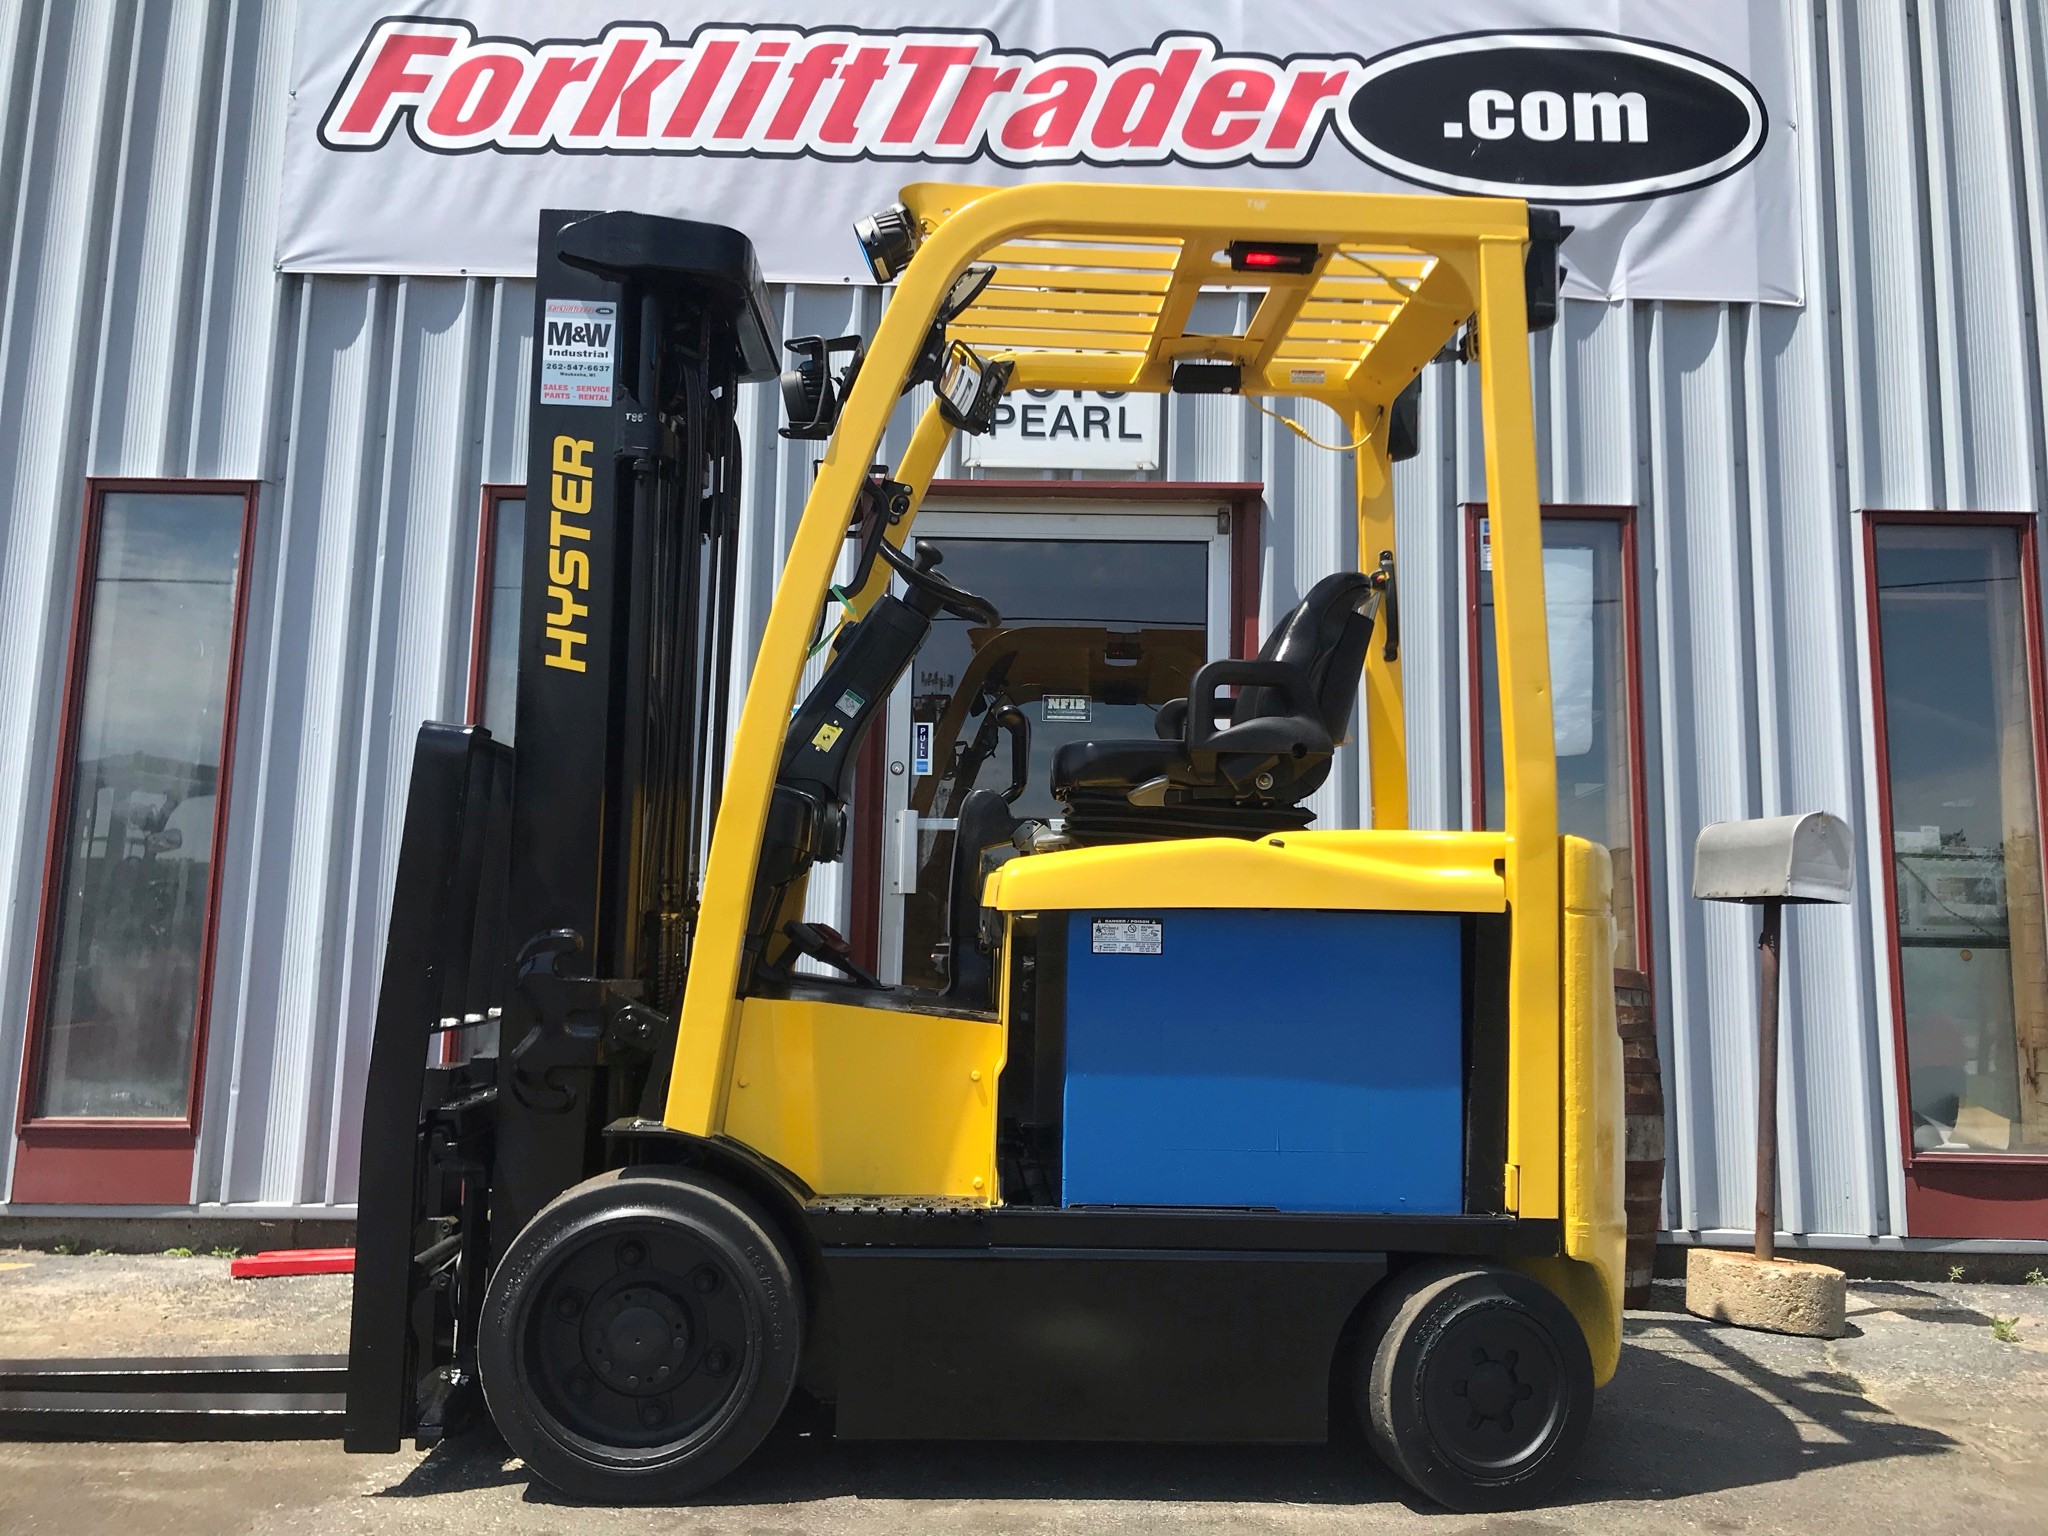 2015 hyster forklift with 187" lift height for sale